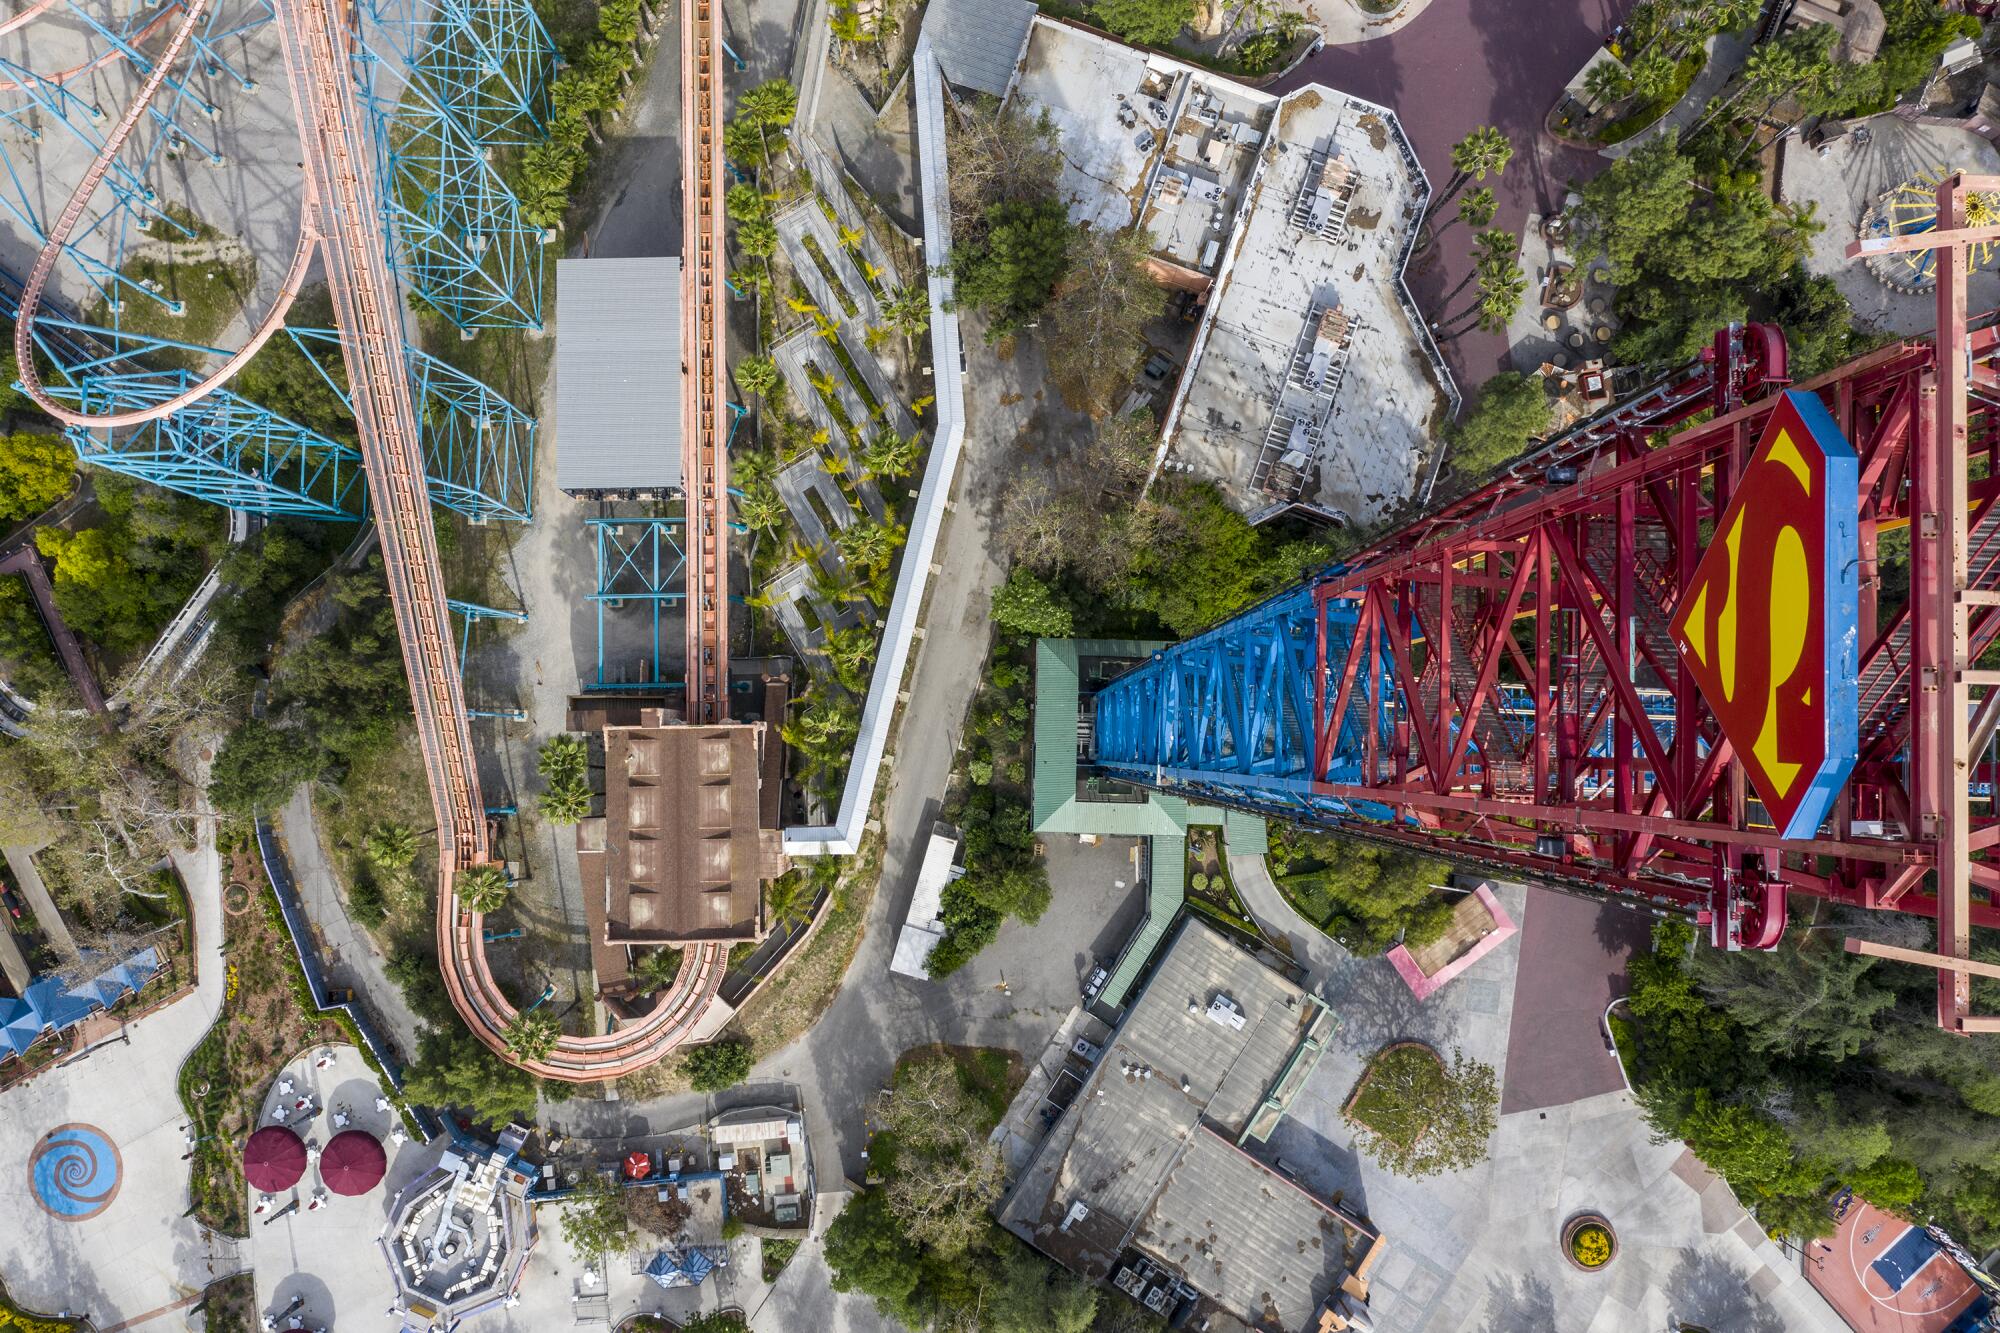 Superman towers over the Goliath roller coaster at Six Flags.